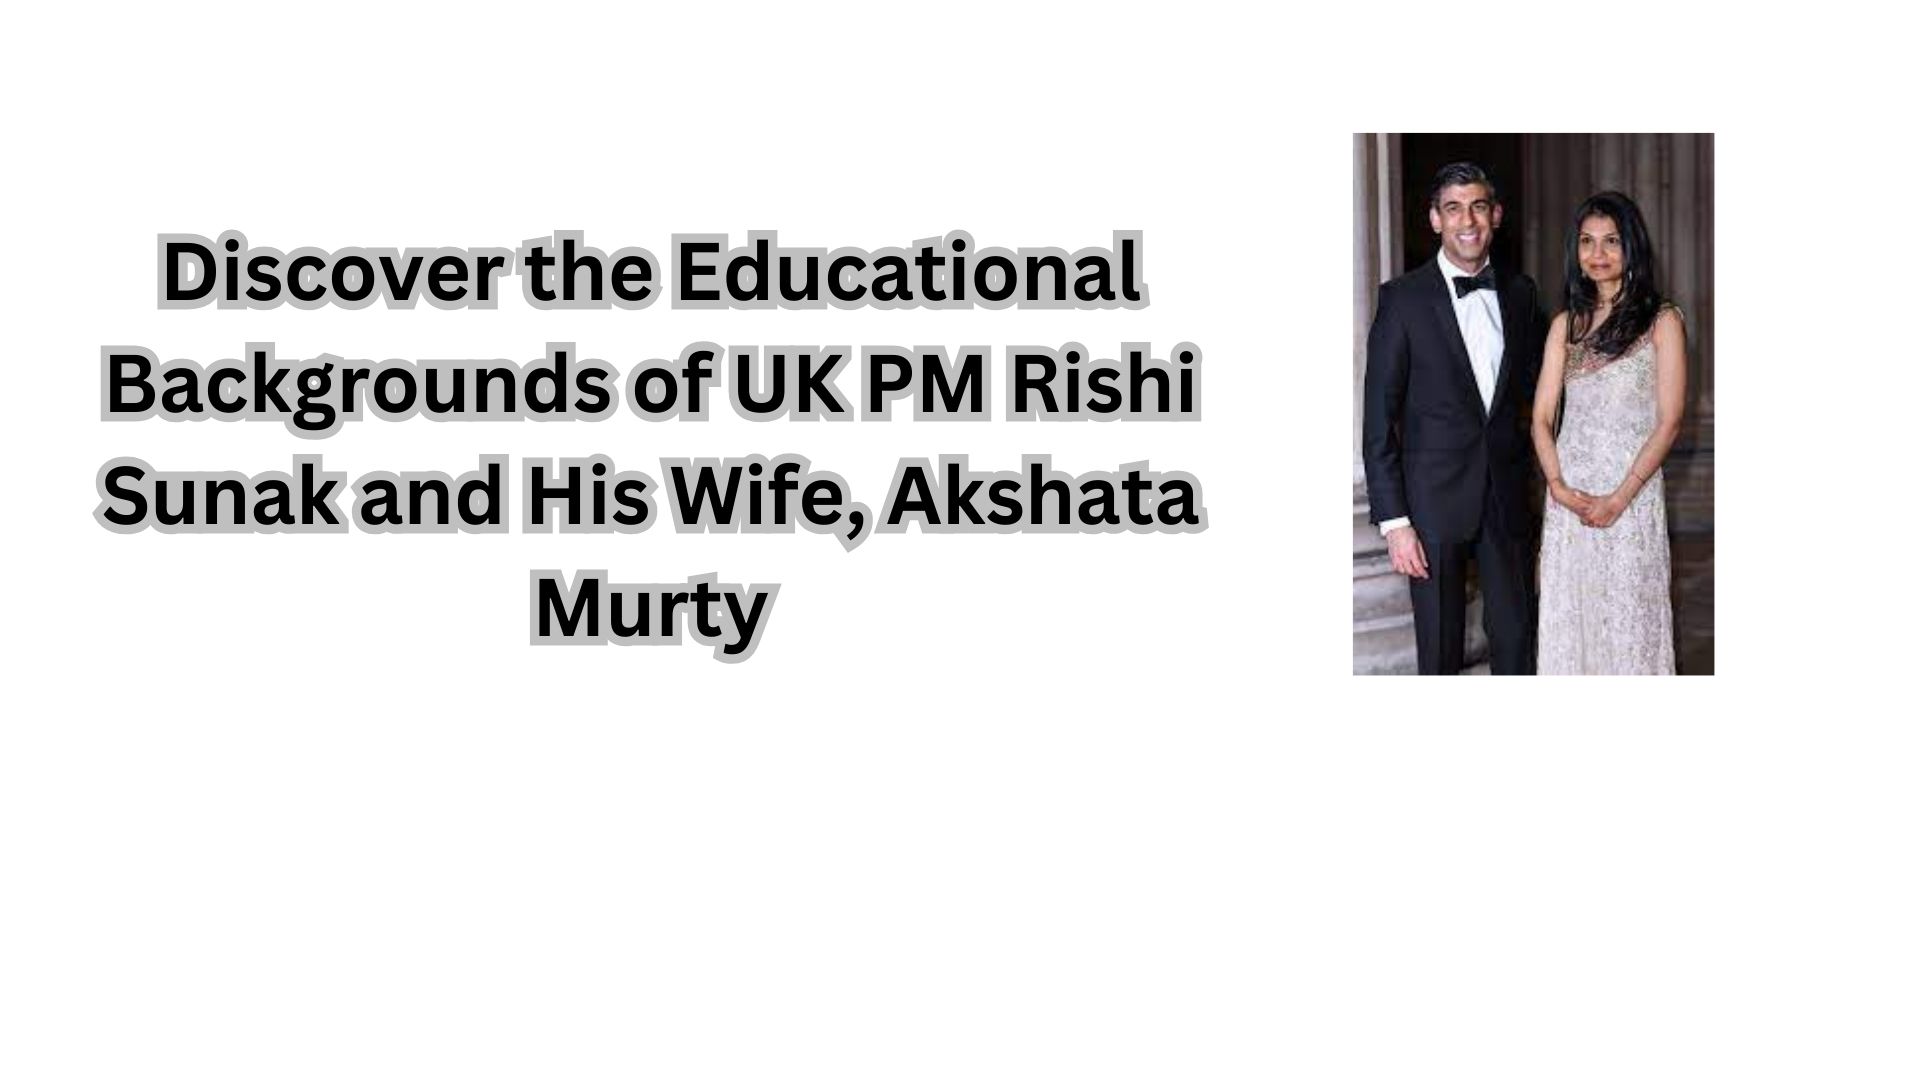 Discover the Educational Backgrounds of UK PM Rishi Sunak and His Wife, Akshata Murty